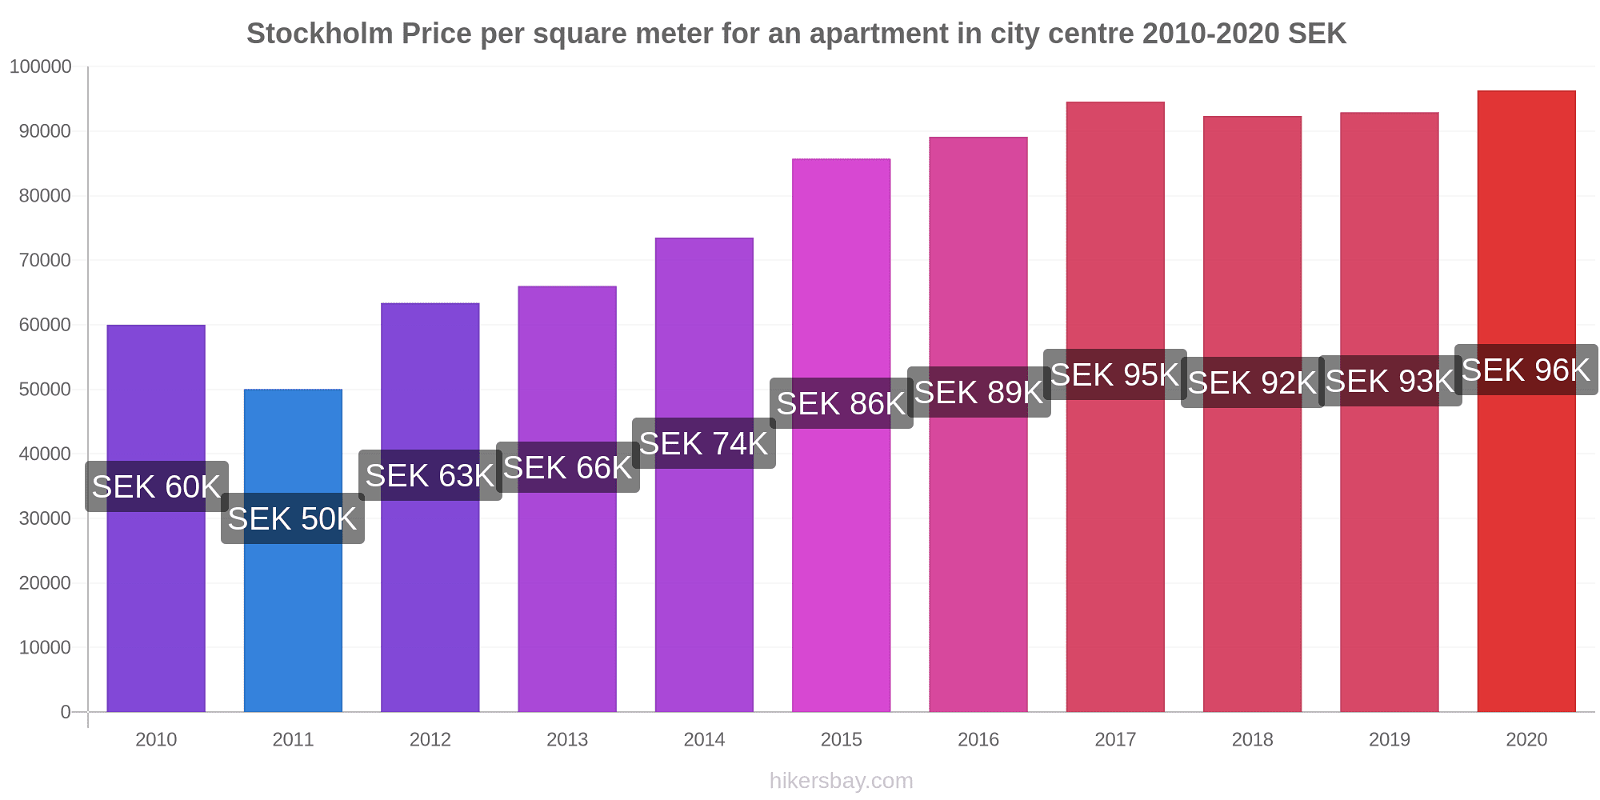 Stockholm price changes Price per square meter for an apartment in city centre hikersbay.com